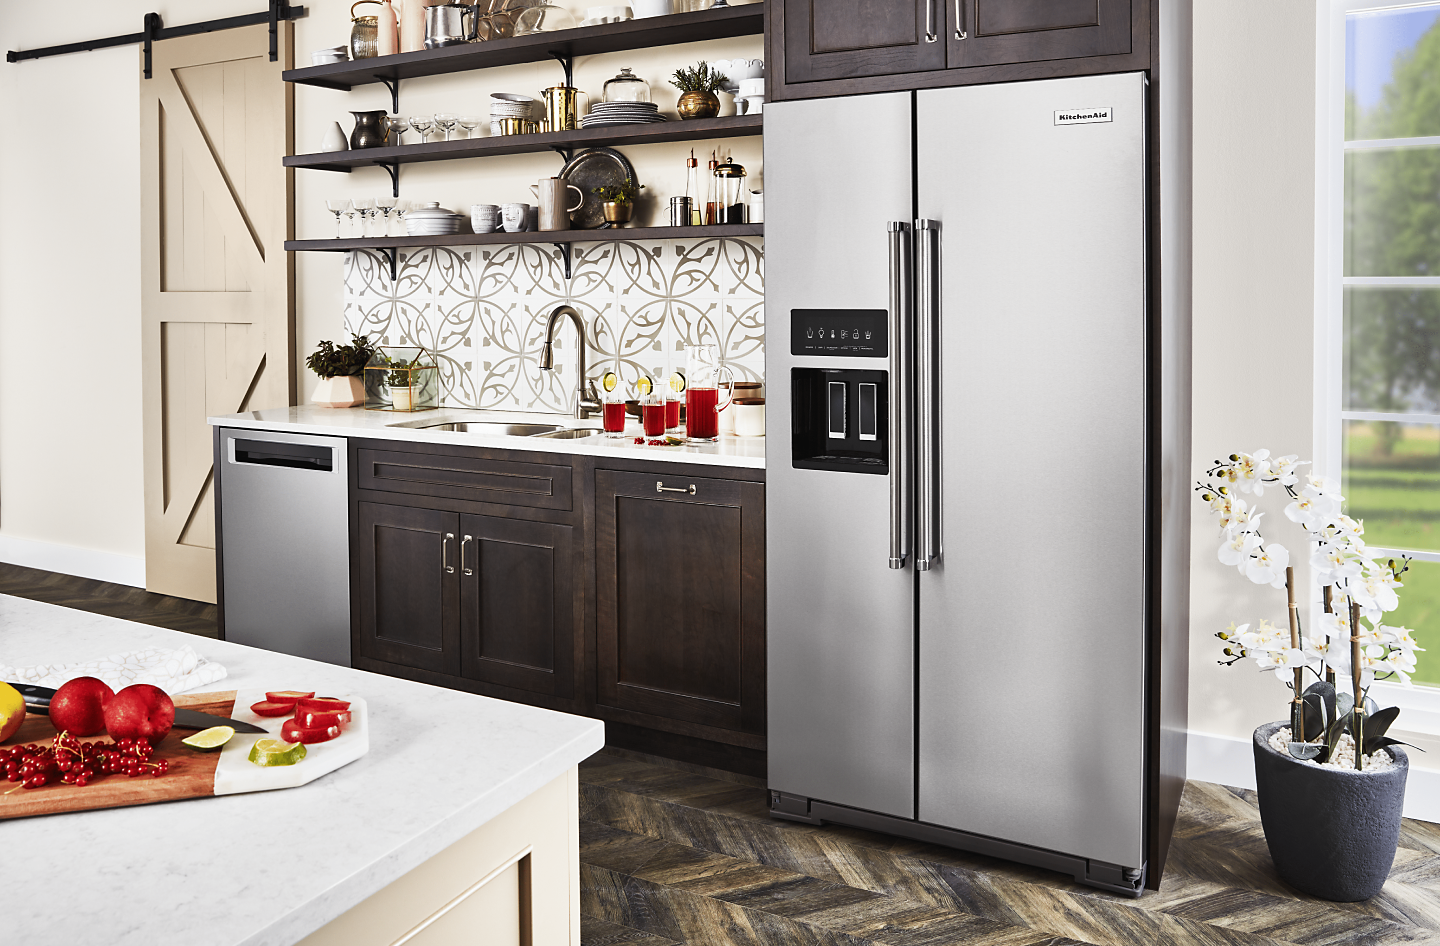 How to Fix a Kitchen Layout with a Refrigerator That's Floating in Space